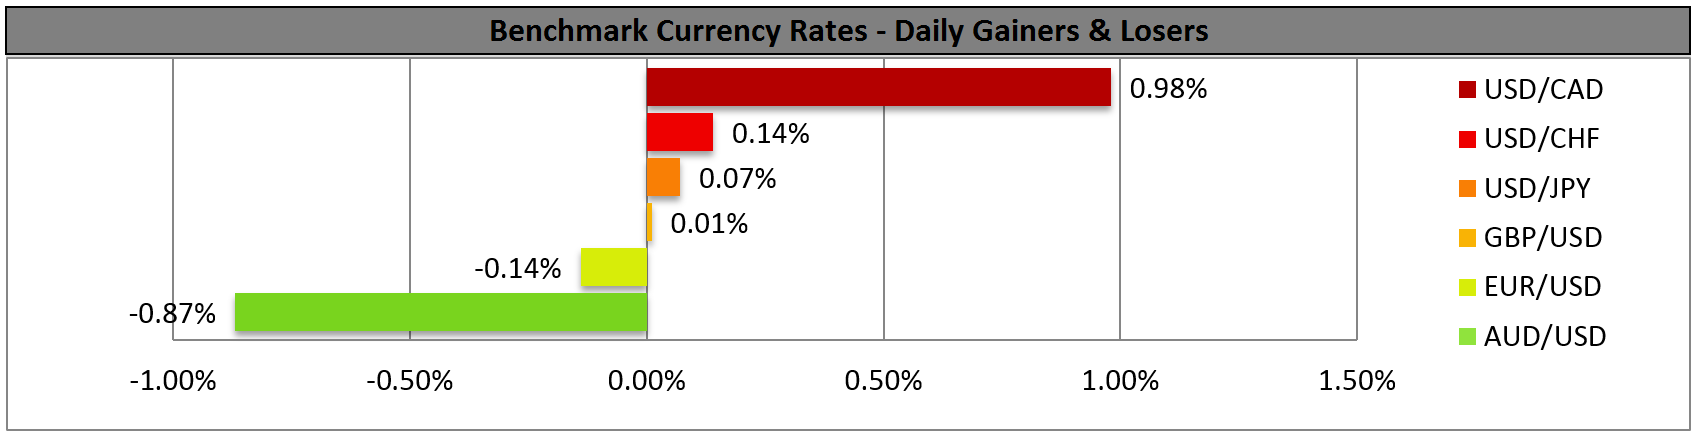 Benchmark Curency Rates: Daily Gainers And Losers